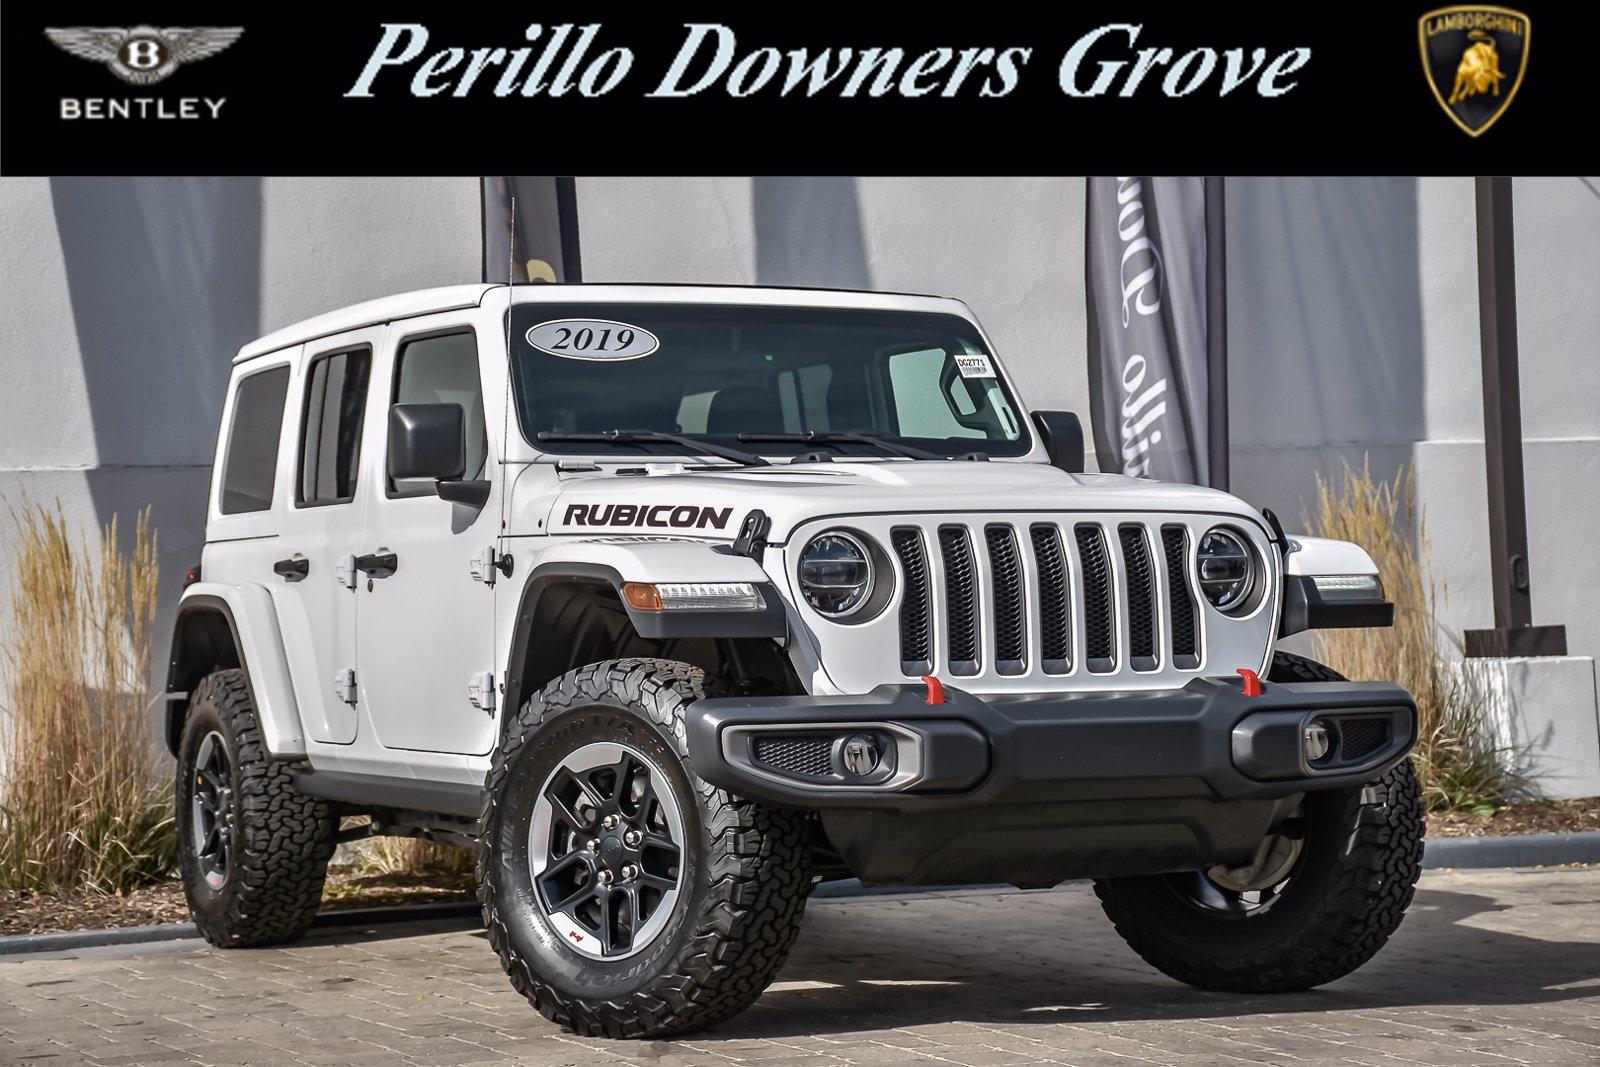 Used 2019 Jeep Wrangler Unlimited Rubicon For Sale (Sold) | Bentley Downers  Grove Stock #DG2771